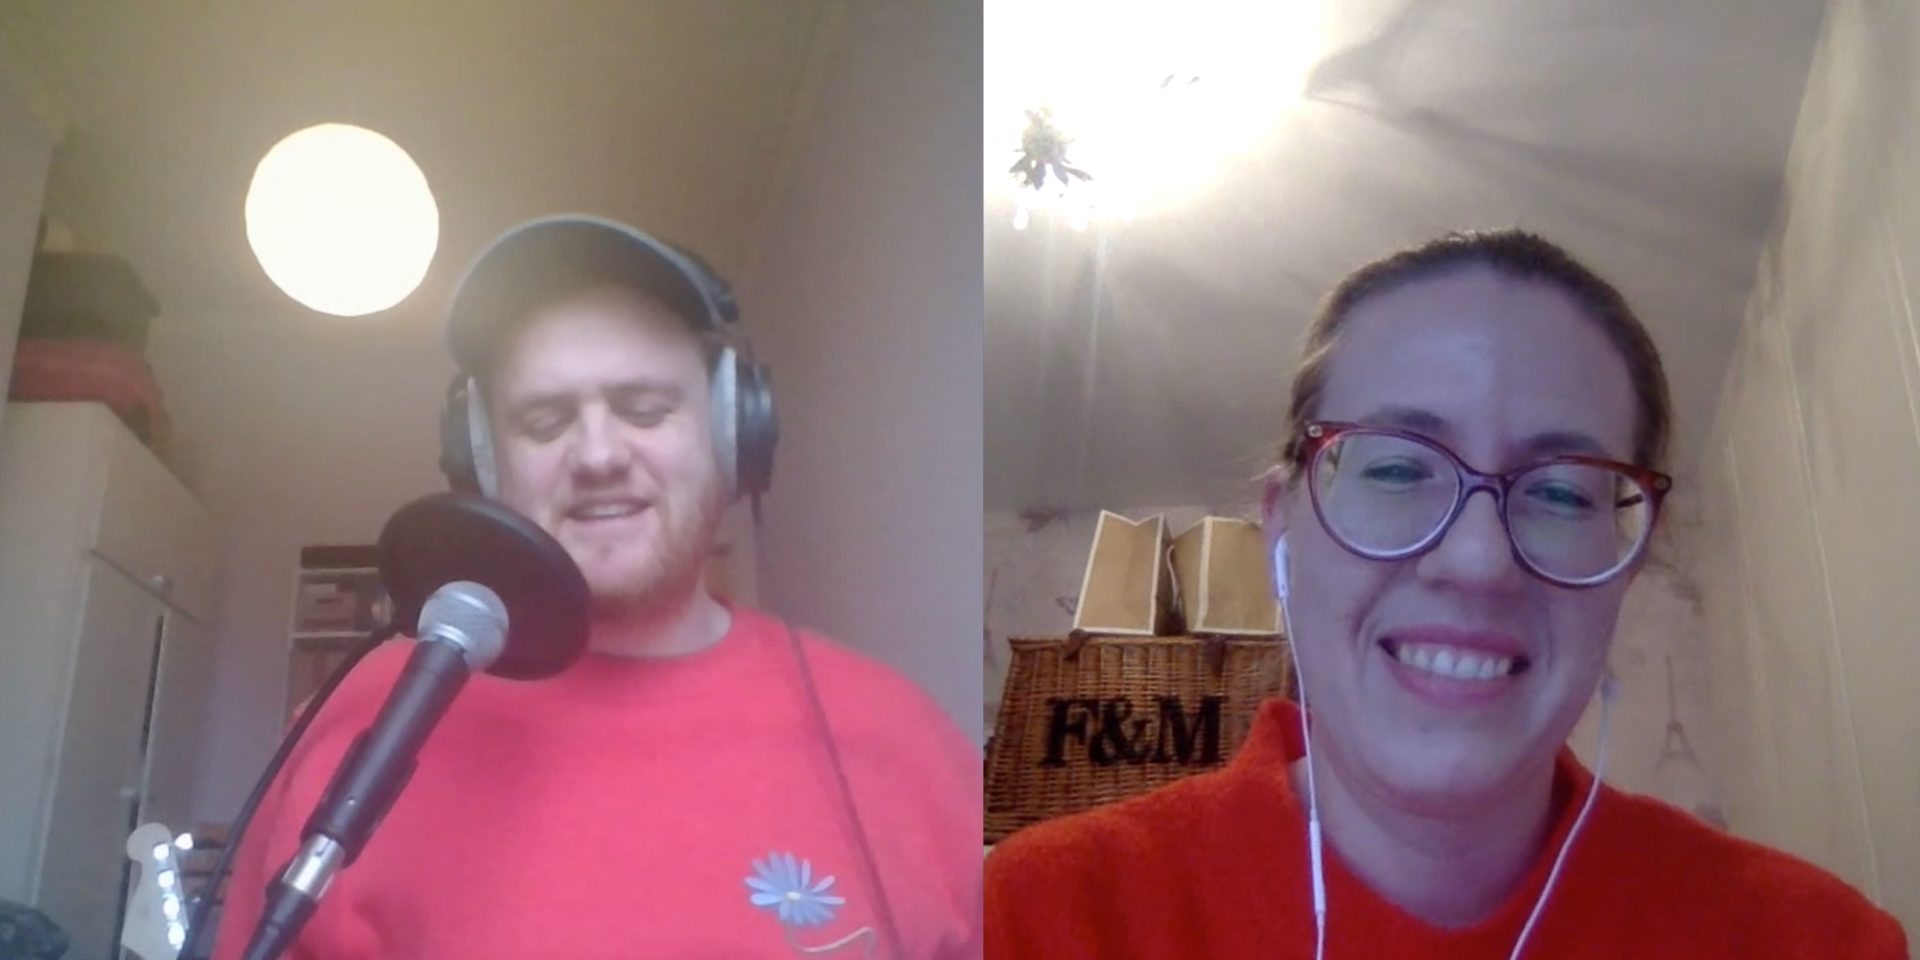 The FFS Show 23: PartyGate & Freedom of Information with Jenna Corderoy from openDemocracy 3